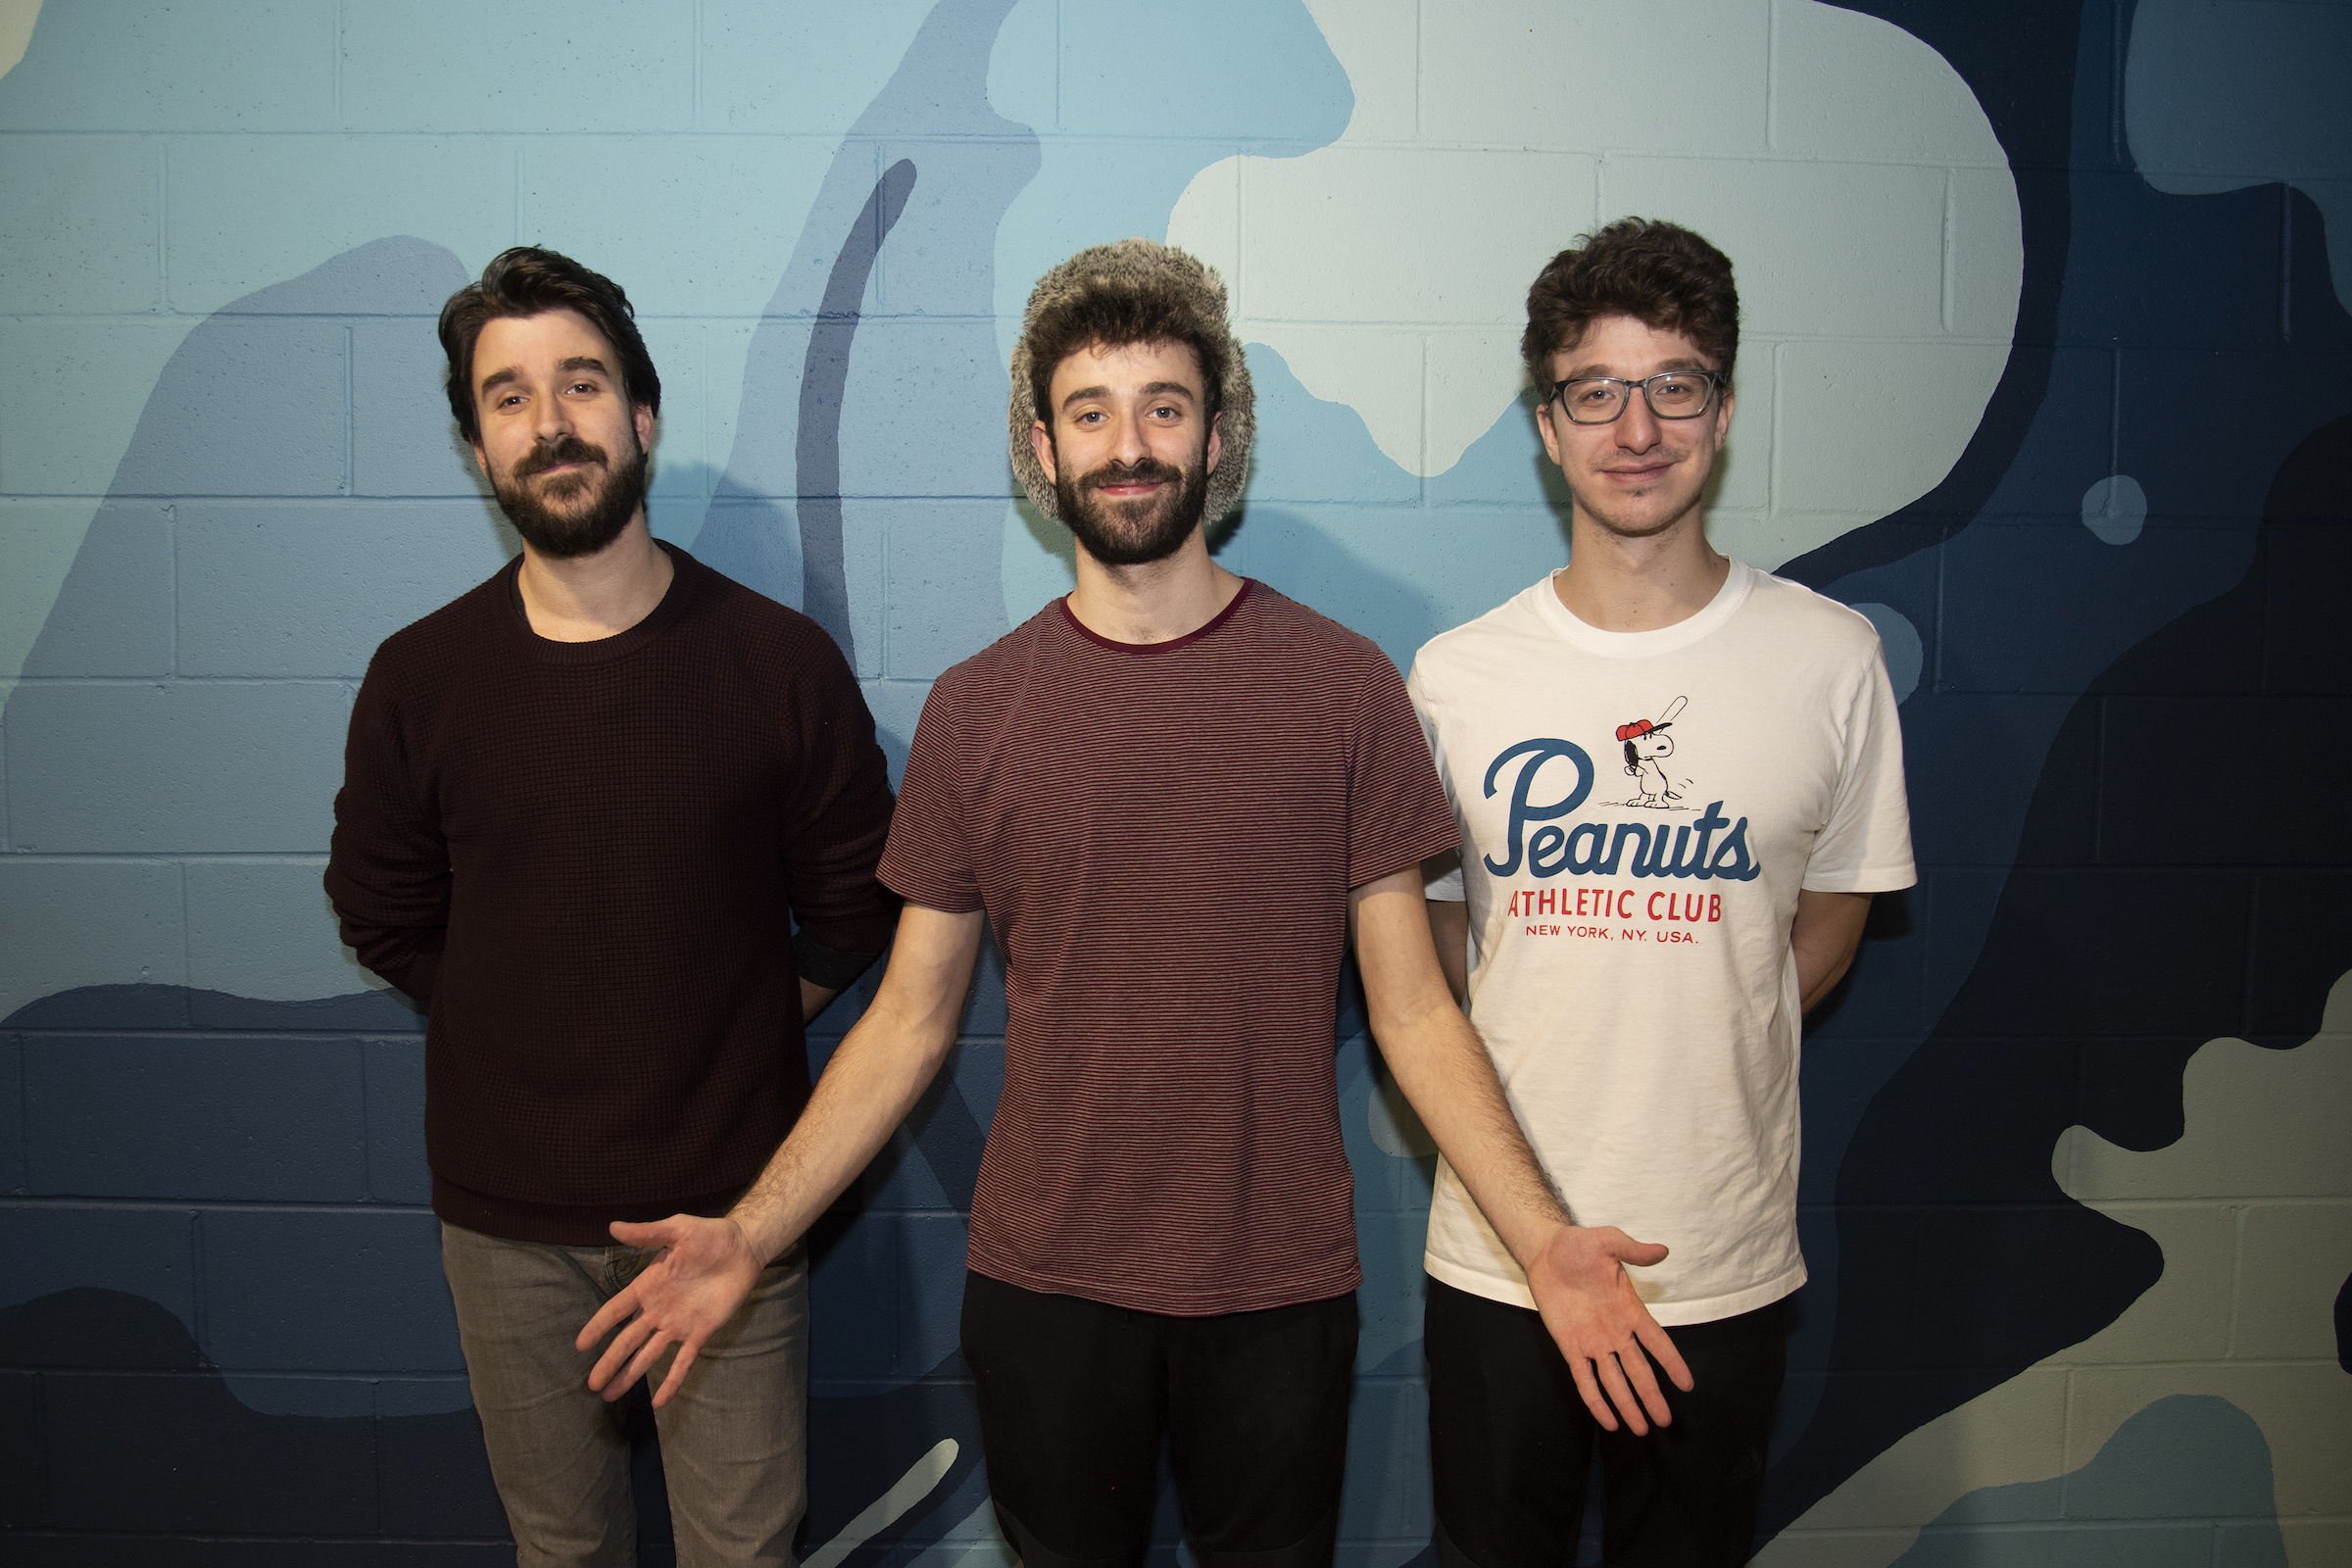 AJR brothers, Sibling harmony, Musical bond, Share your opinion, 2400x1600 HD Desktop